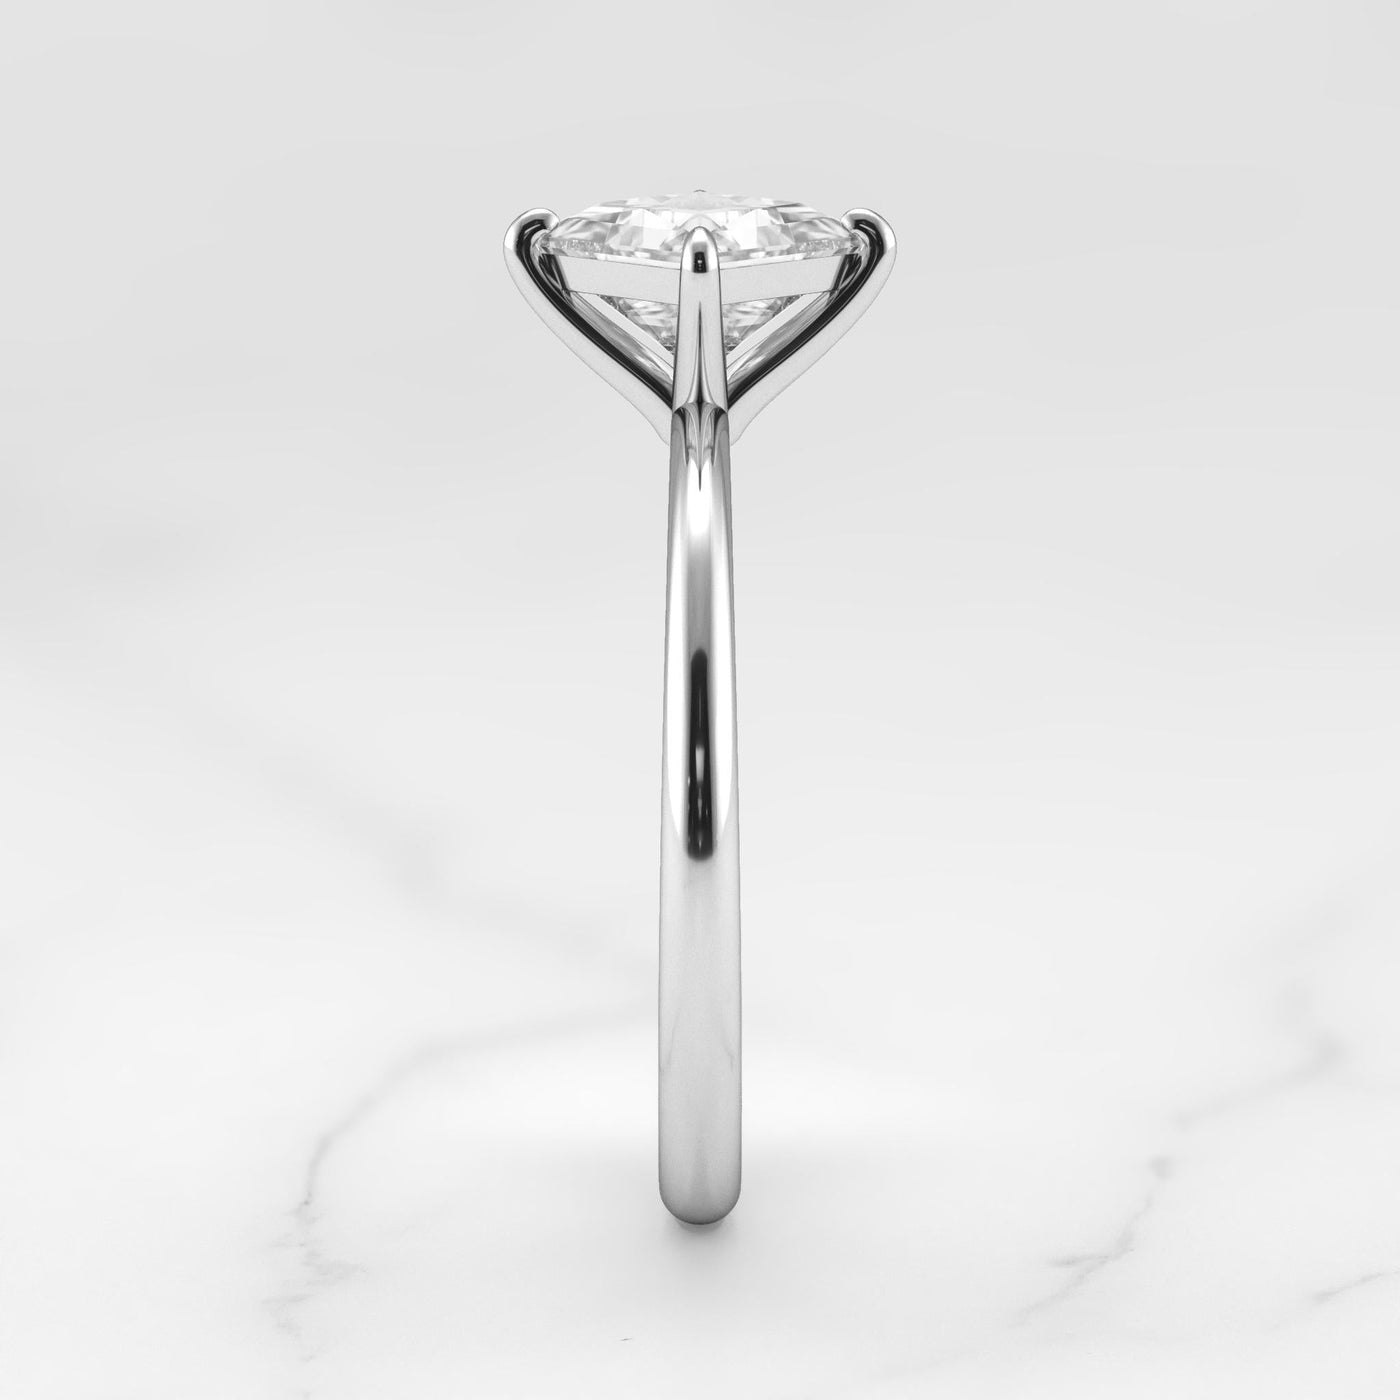 Princess-cut tapered solitaire diamond ring